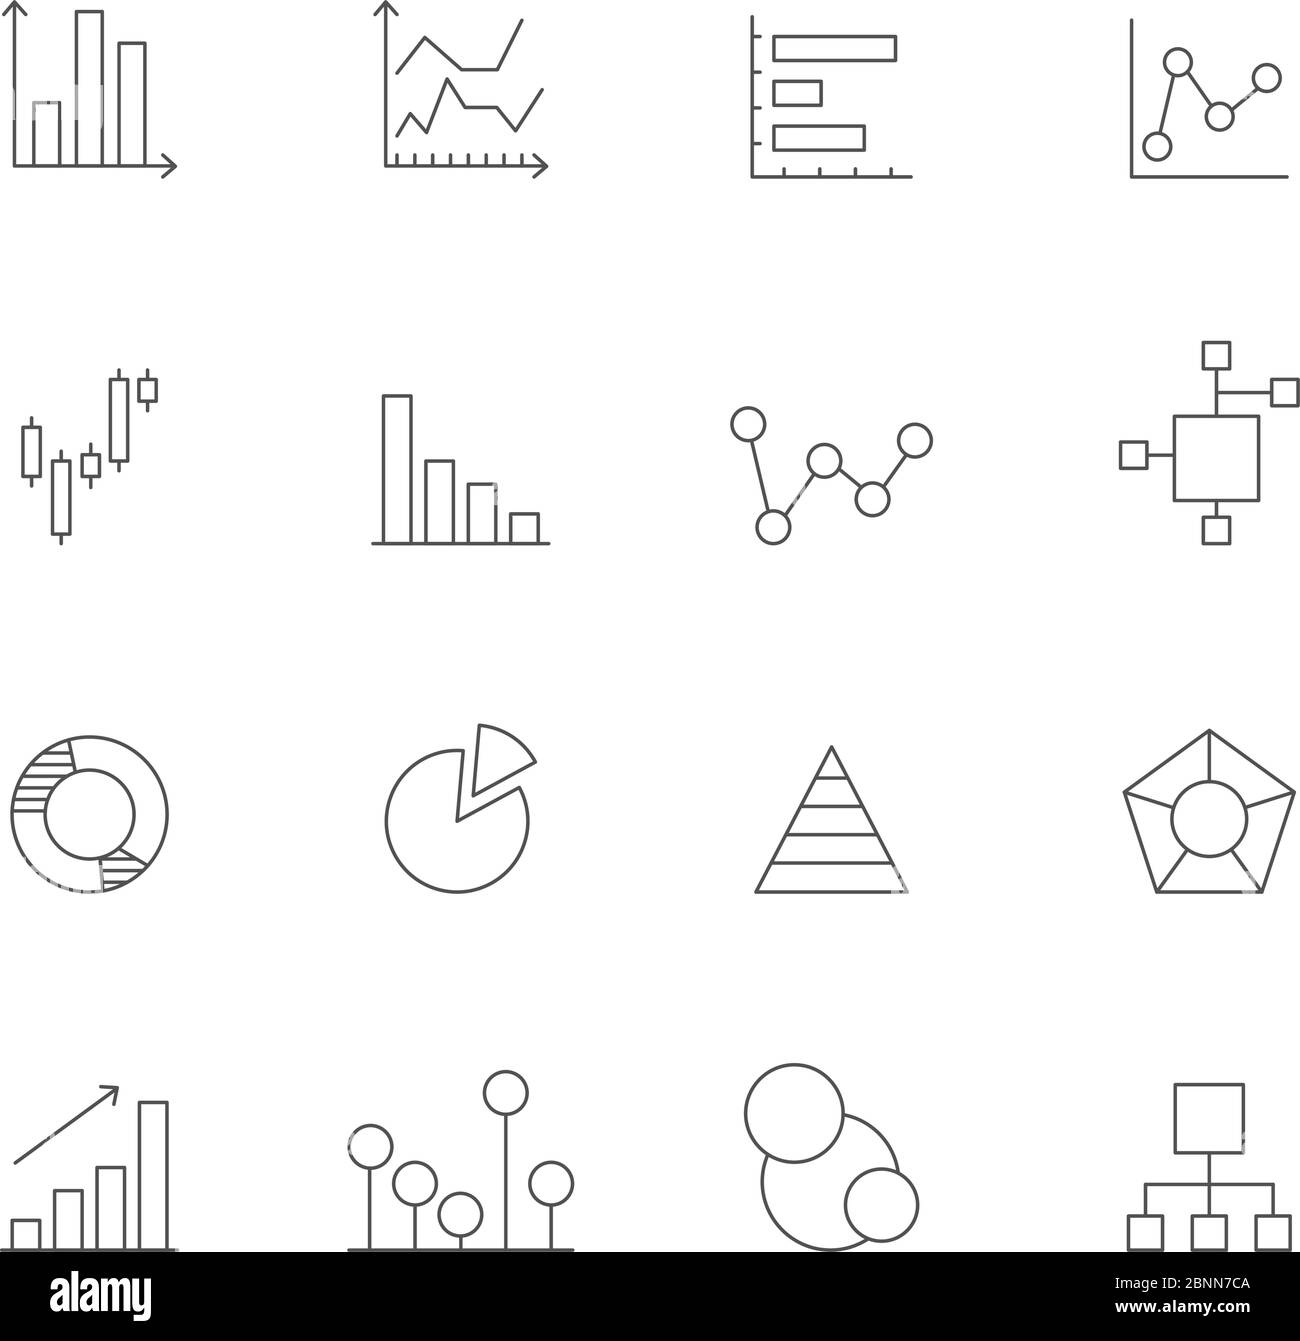 Icons of charts and diagrams. Mono line pictures of various business diagrams Stock Vector